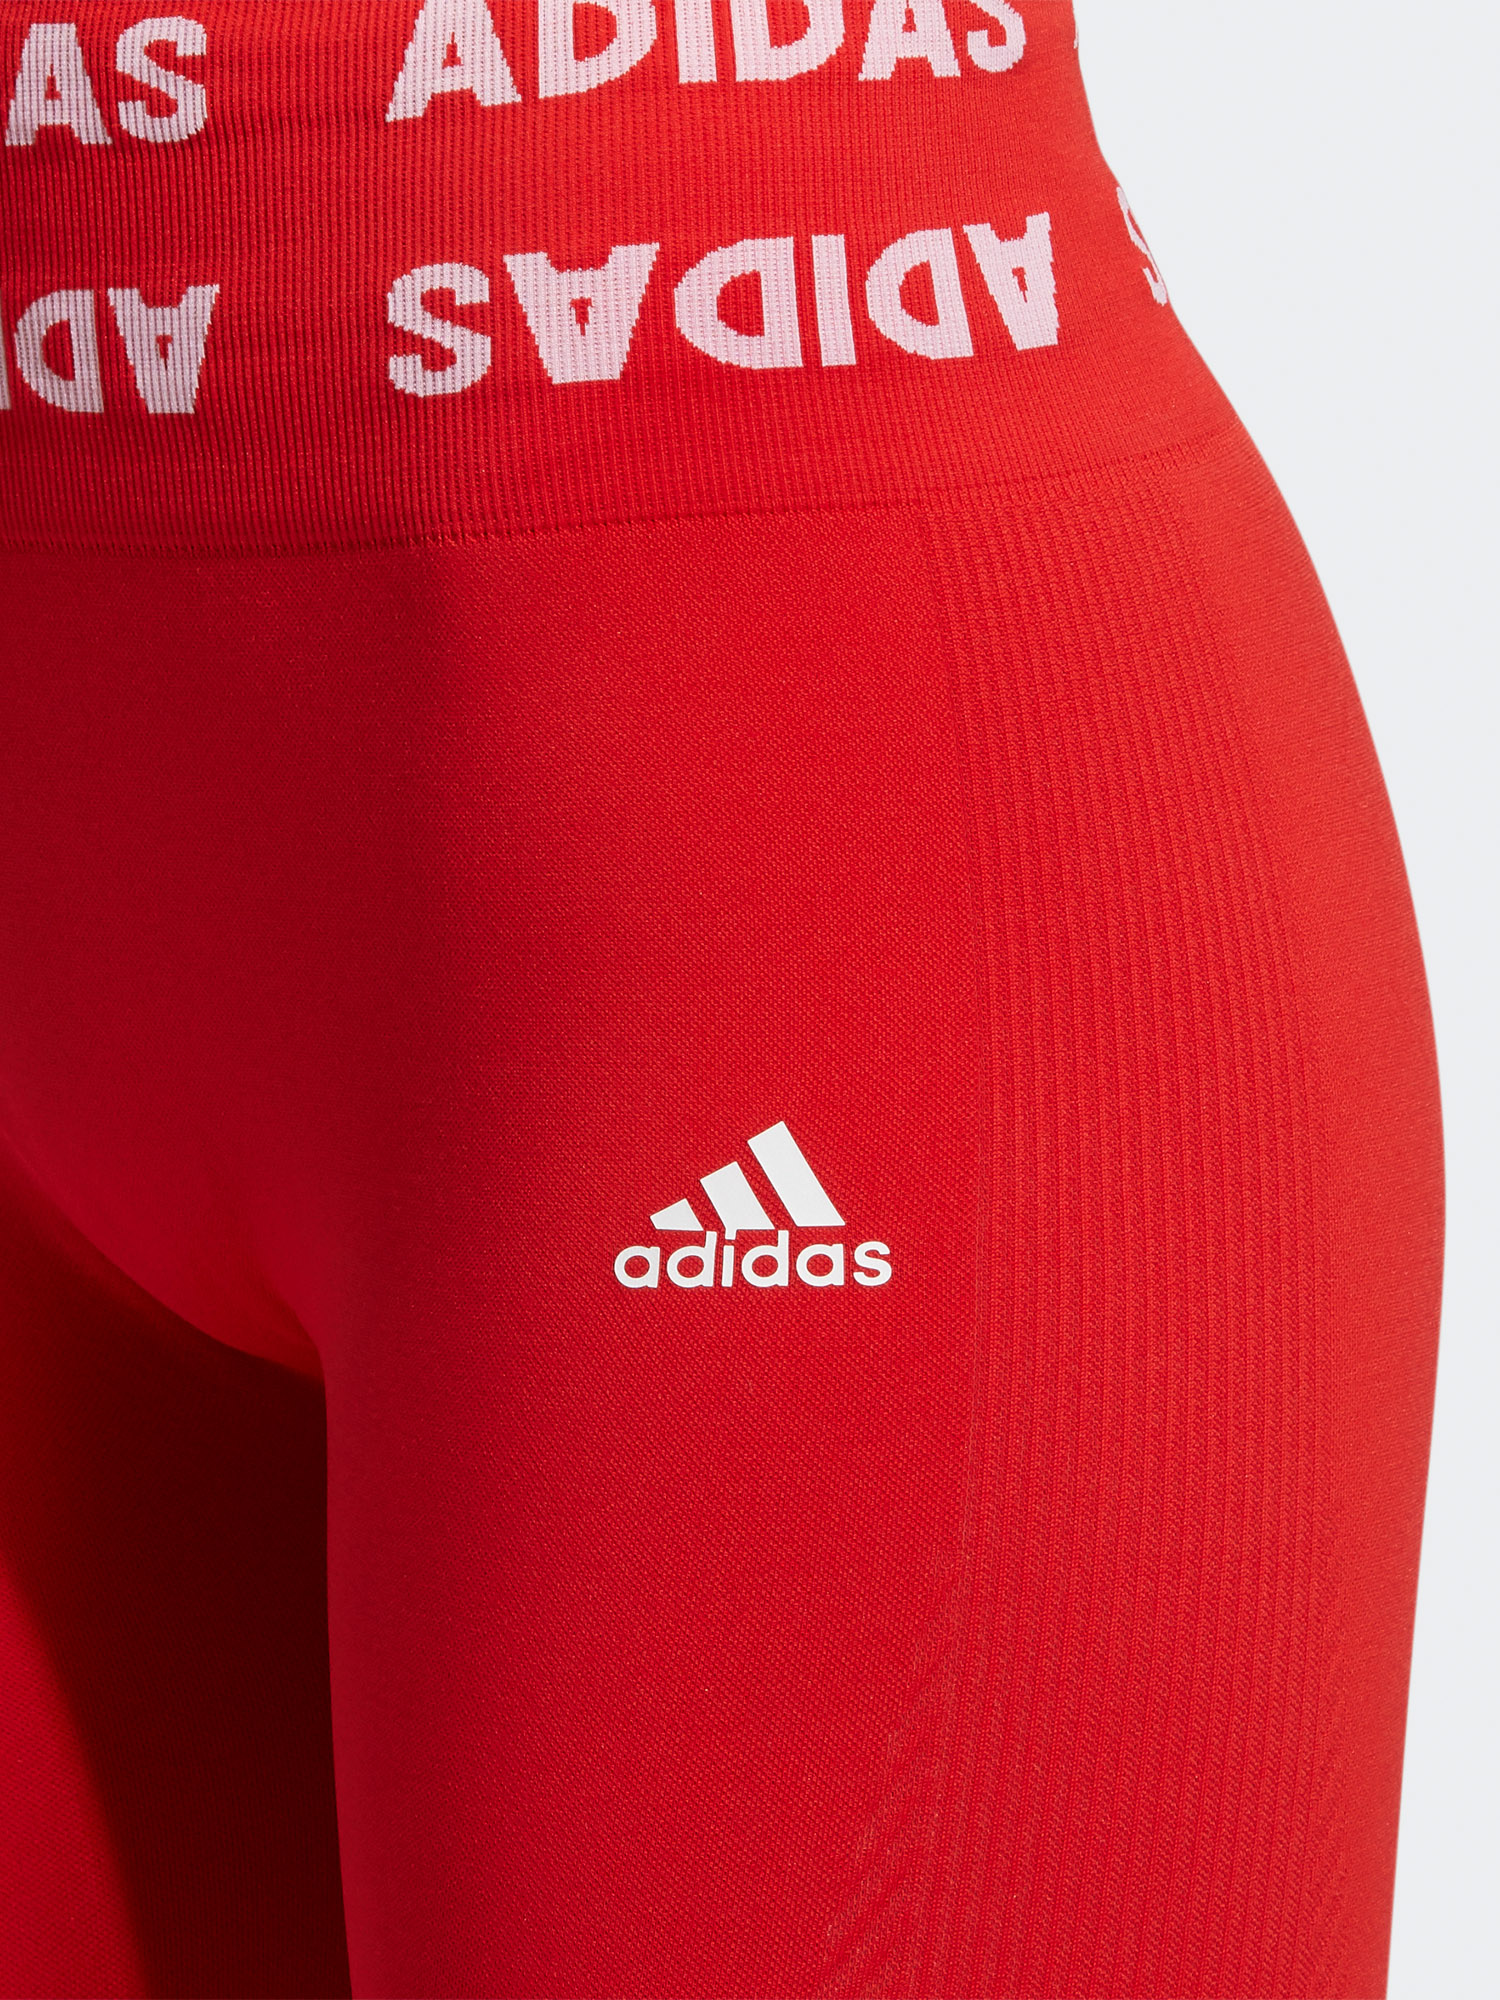 ADIDAS PERFORMANCE Sporthose in Feuerrot 